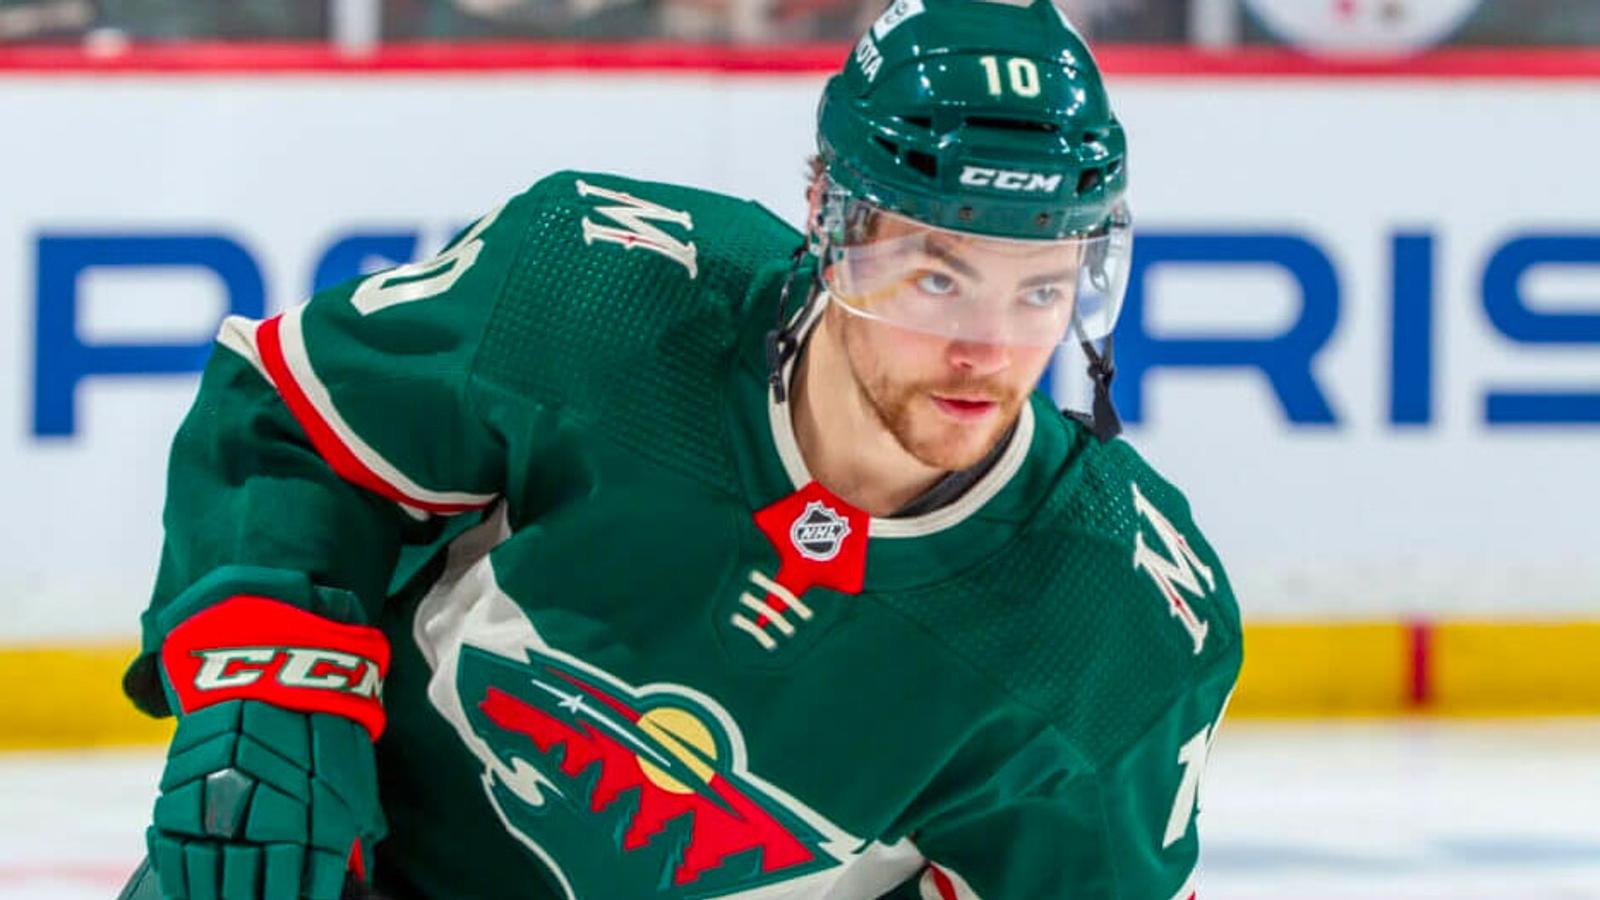 Jost points to locker-room issues with Minnesota Wild after being claimed on waivers